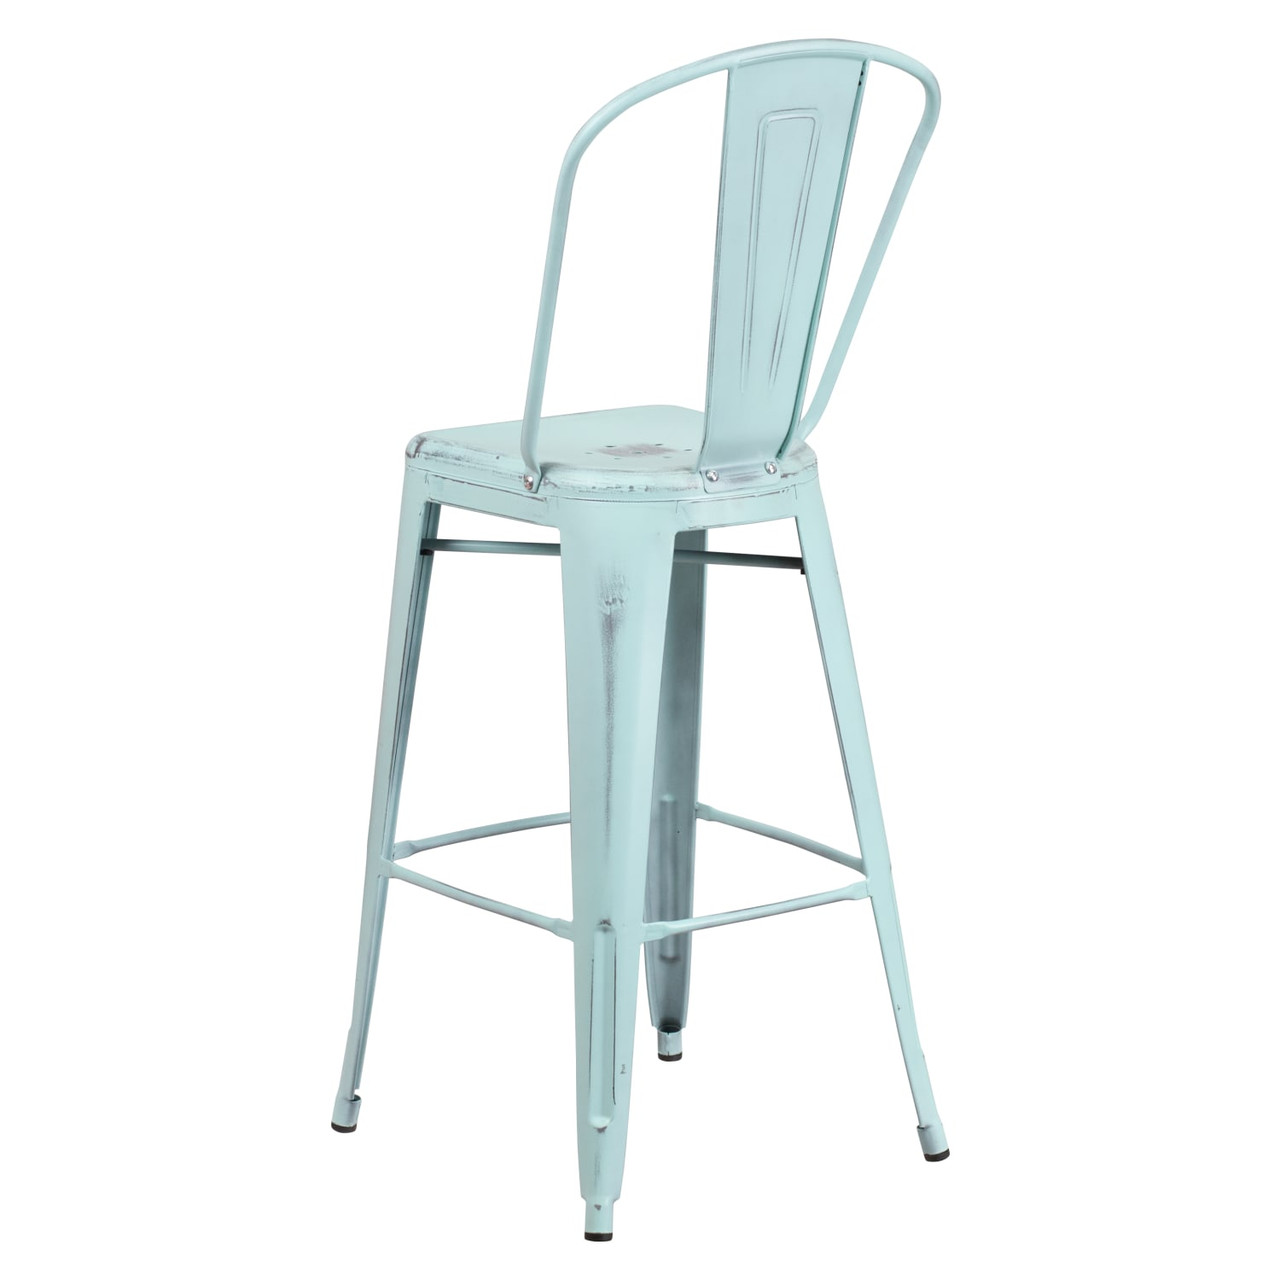 30” High Distressed Green-Blue Metal Indoor-Outdoor Barstool with Back